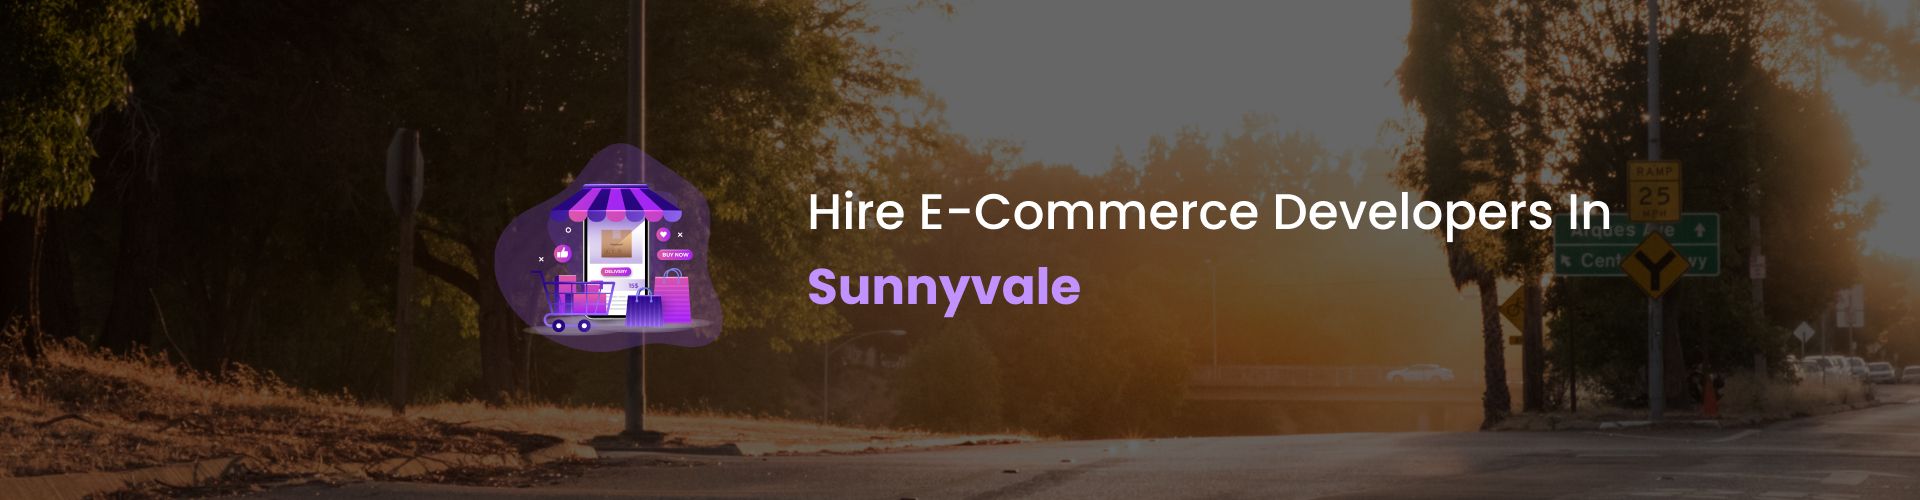 hire ecommerce developers in sunnyvale